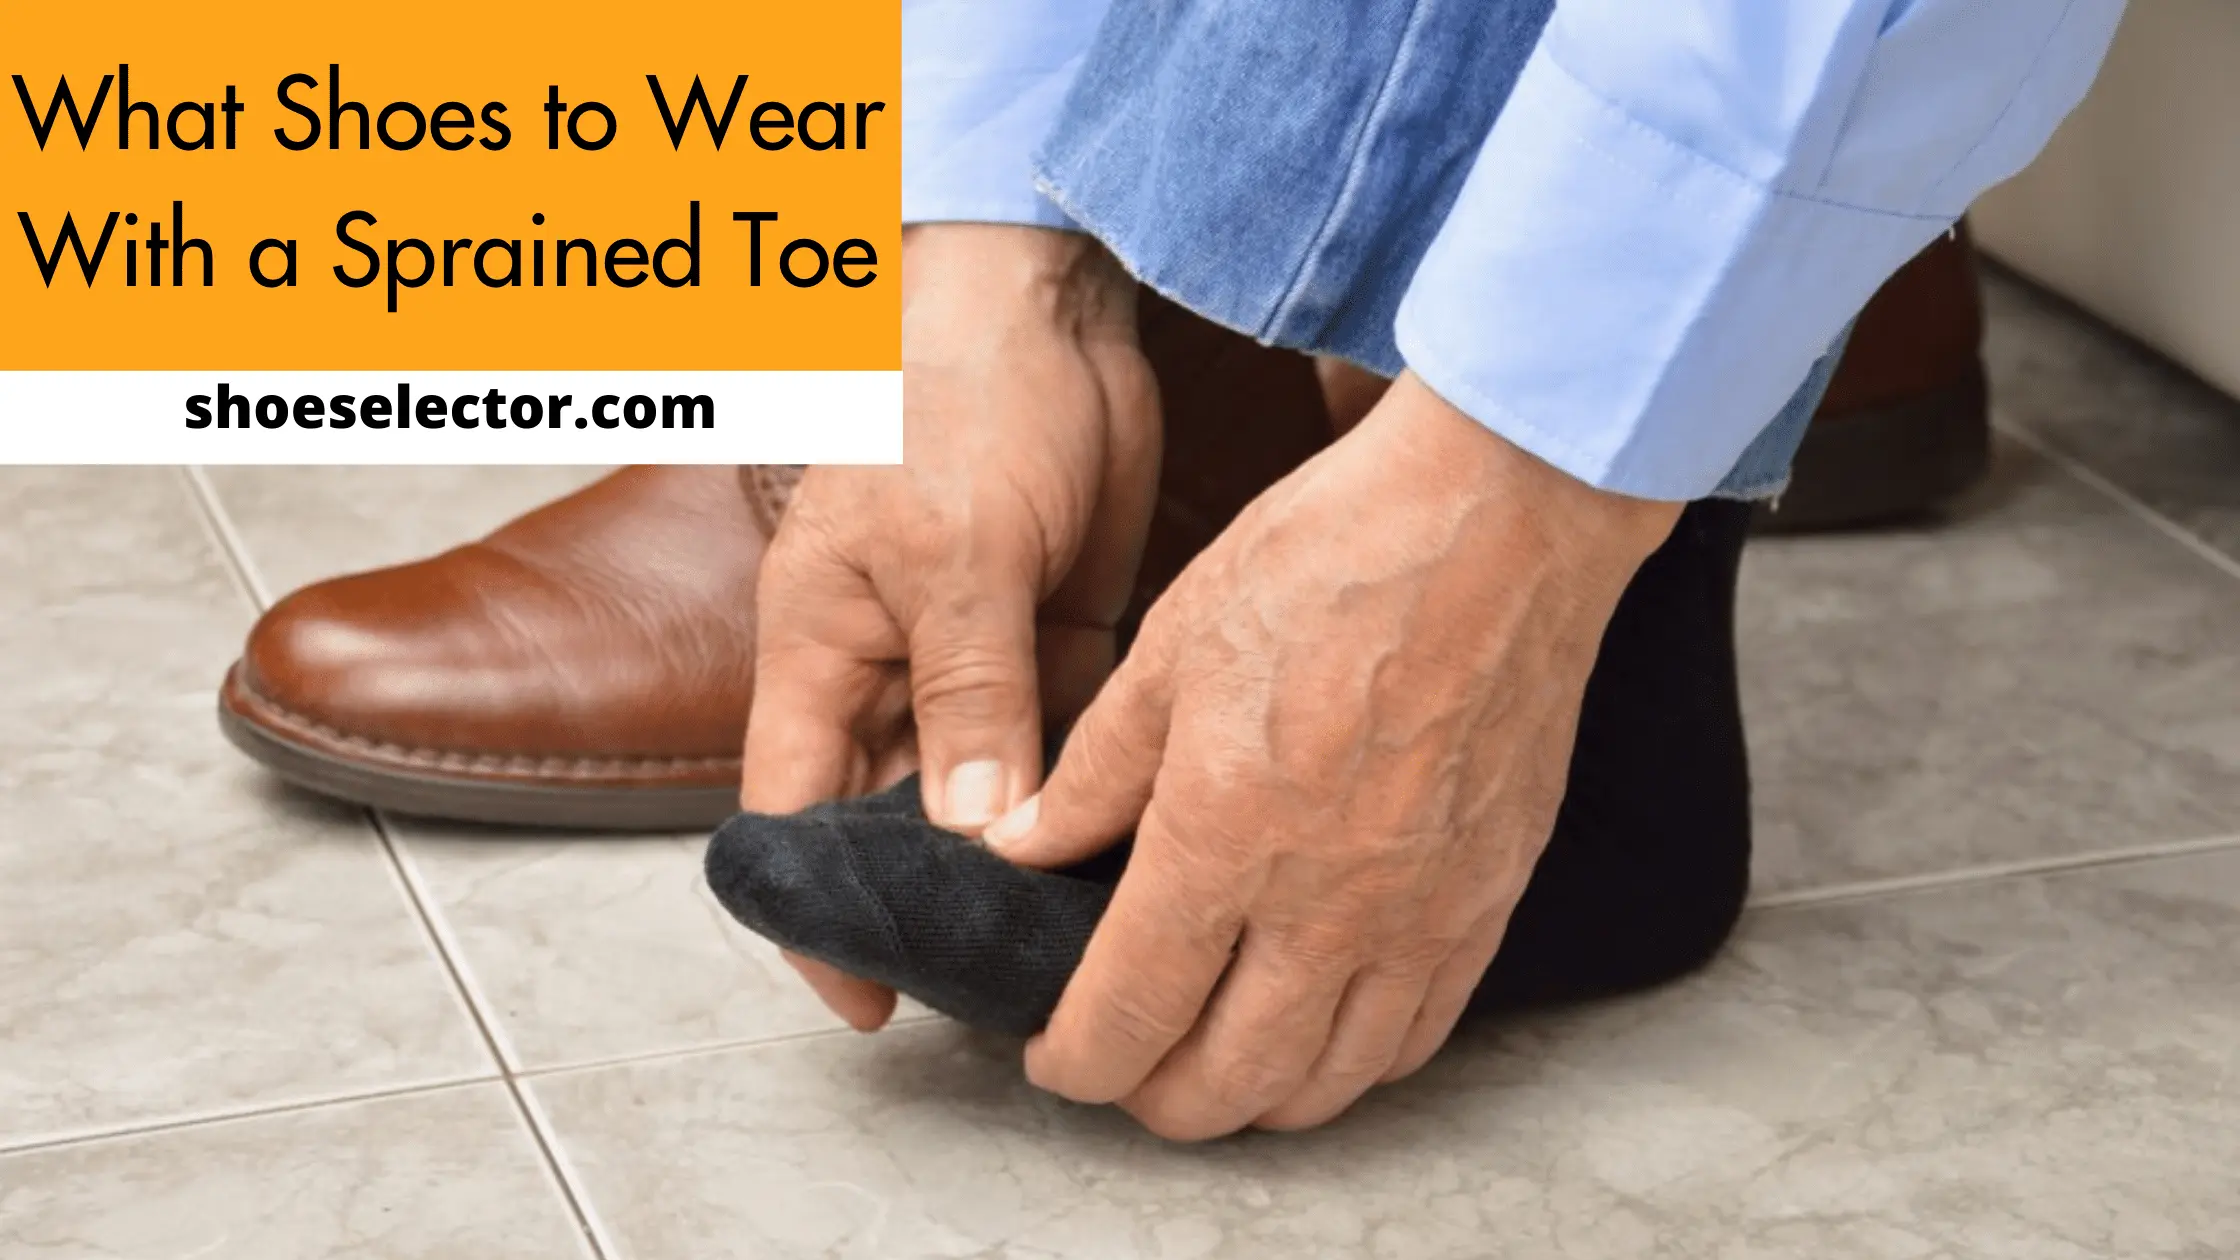 What Shoes to Wear With a Sprained Toe? - Pro Guide